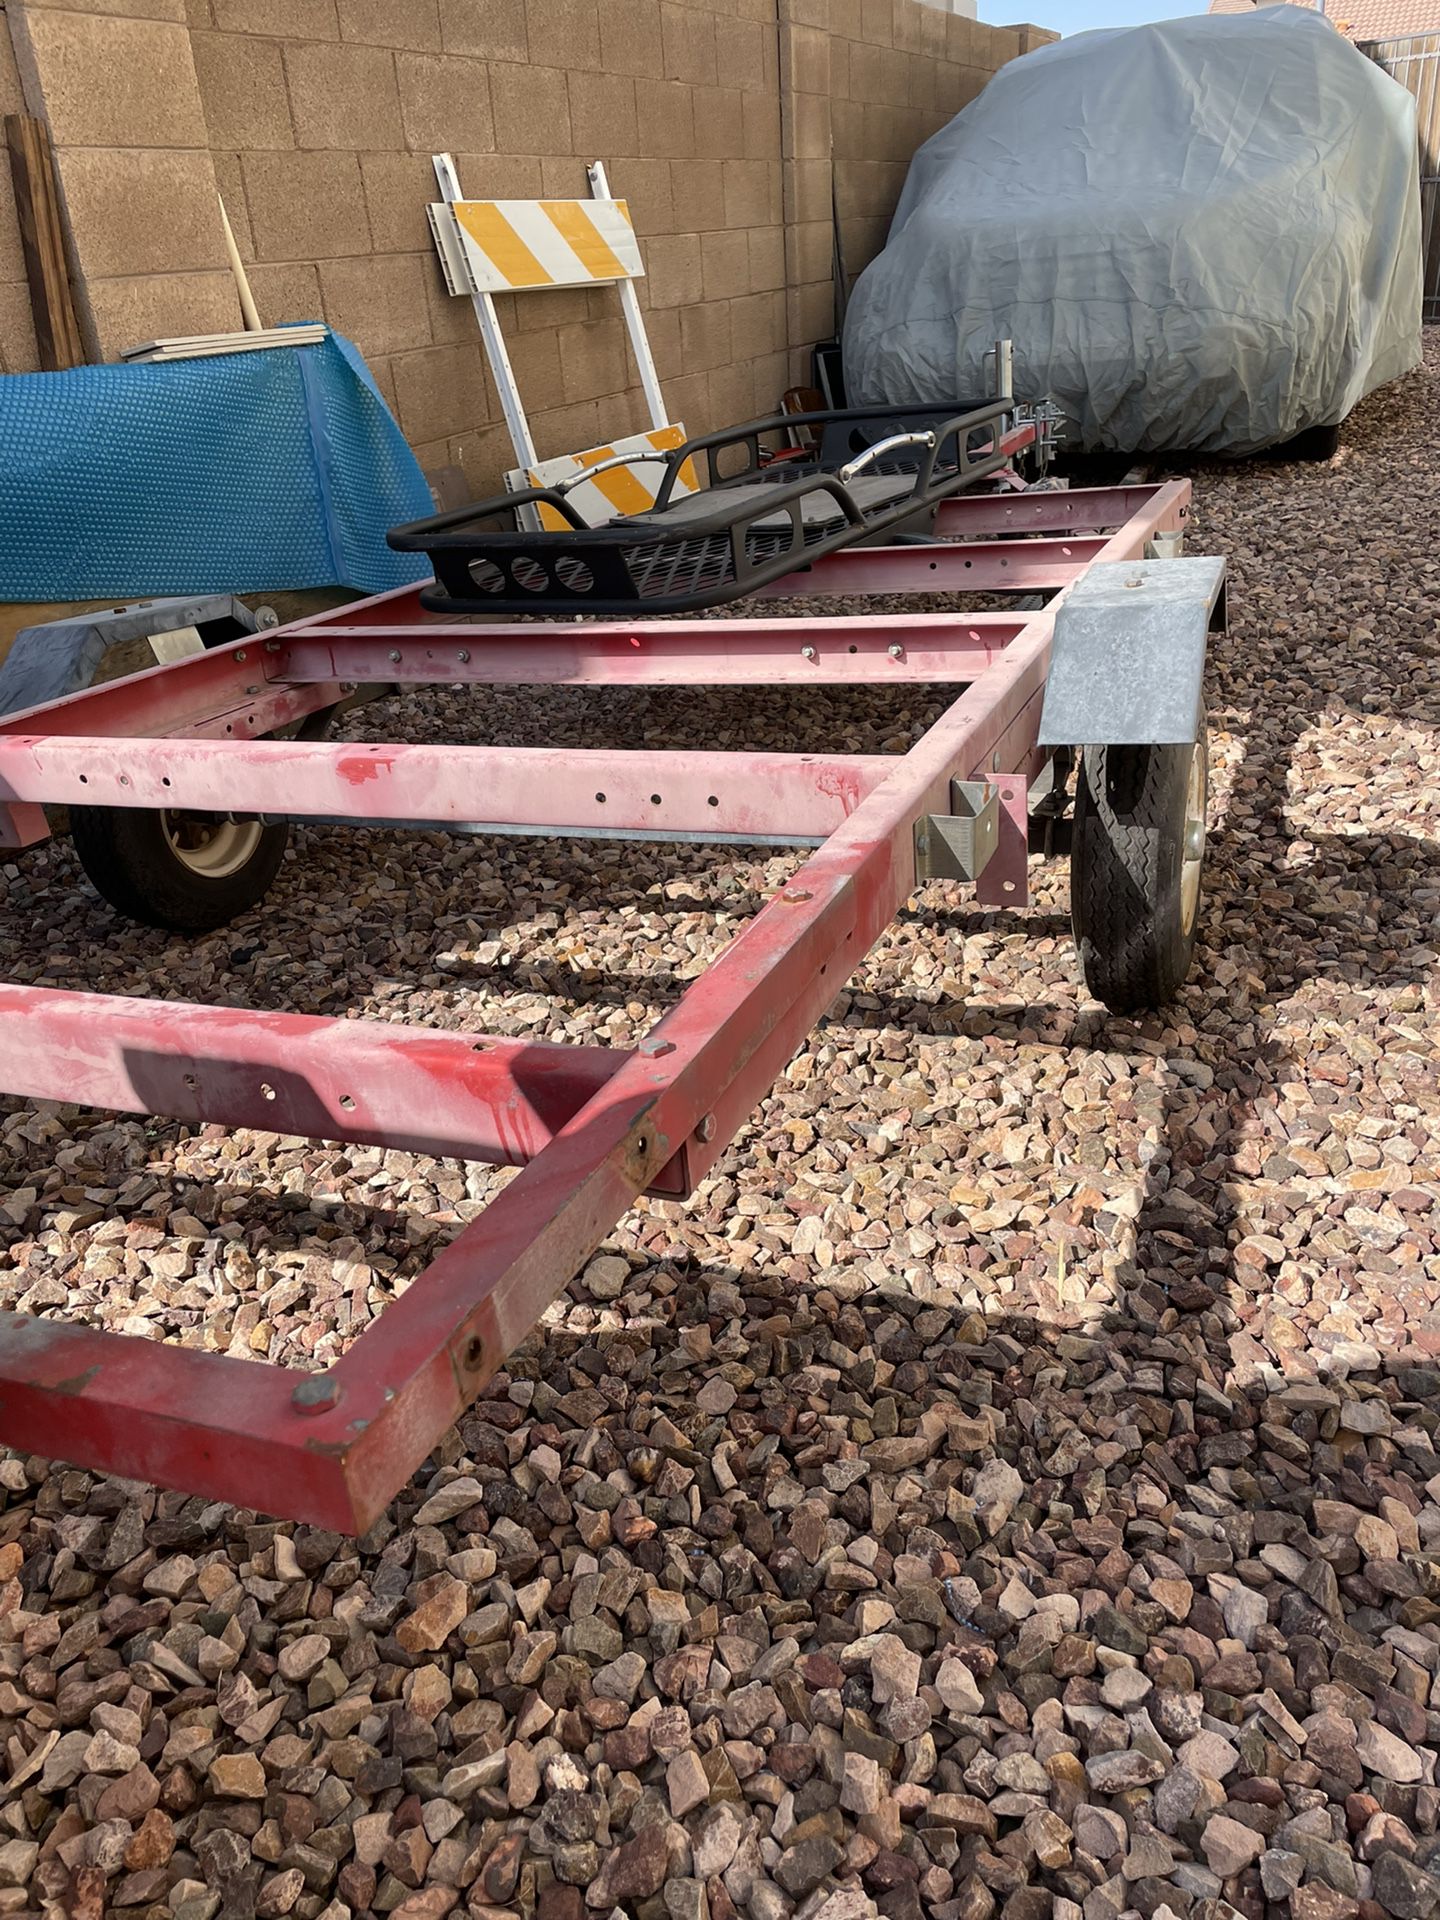 Trailer Fold Up For Storage Als48 inTrailer Fold Up For Storage A48 inchesFrom the carrying area to the hitch wide 108 inches for length I am +78 inch